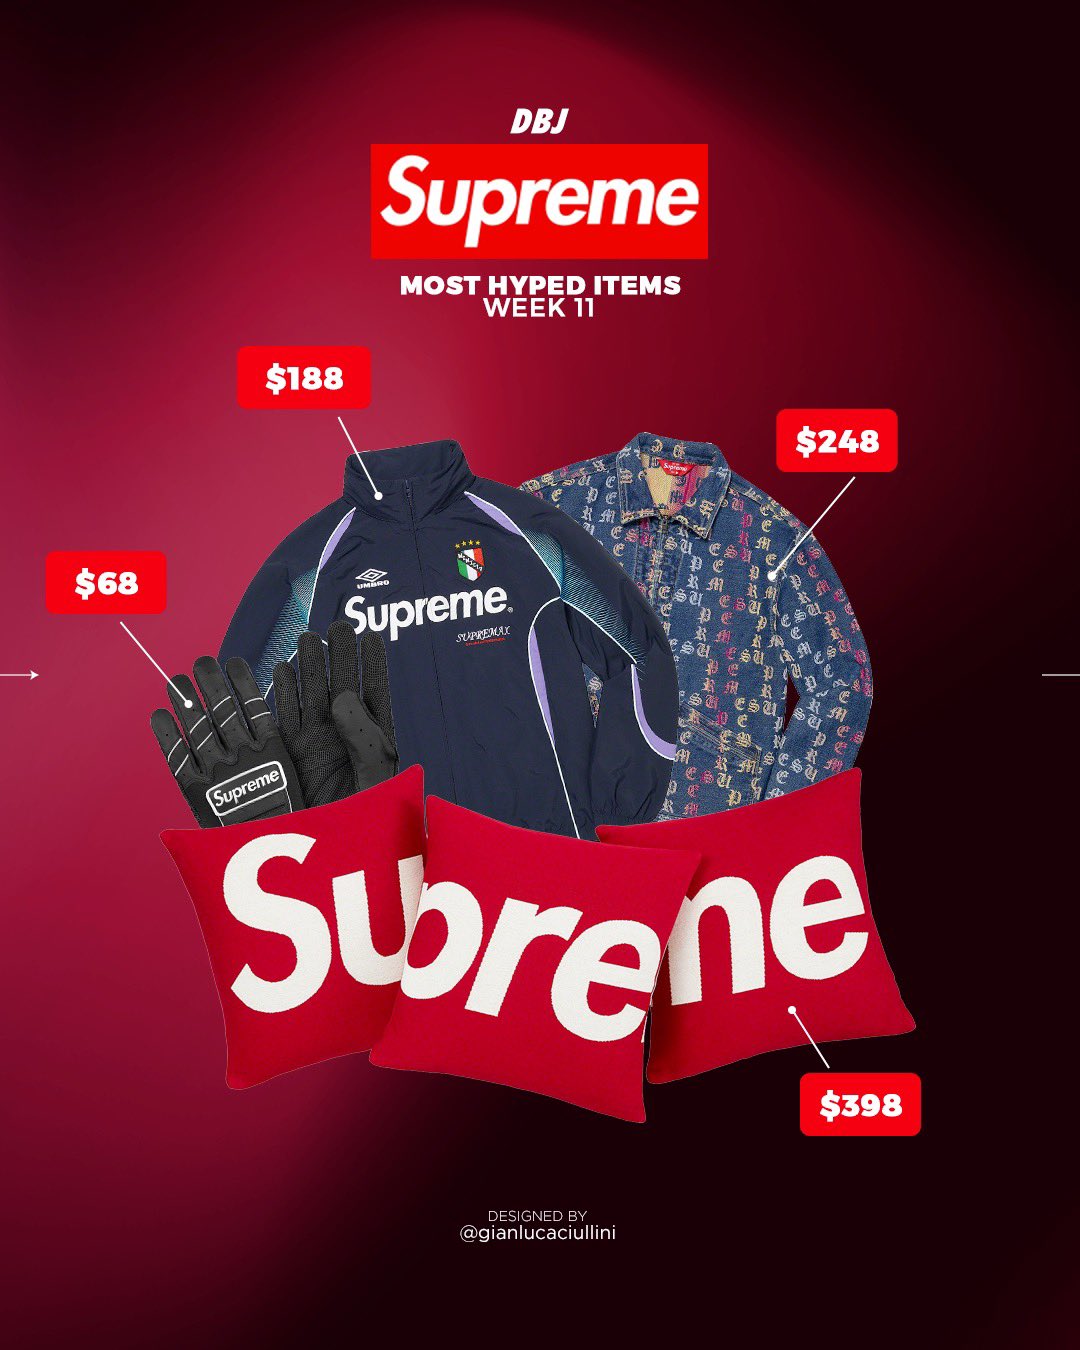 DropsByJay on X: Supreme Week 11 Guide Here are the retail prices and  droplist for this weeks Supreme release. Dropping Thursday, May 4th at 11am  Est/17:00 CEST/16:00 BST/Japan on Saturday. What are